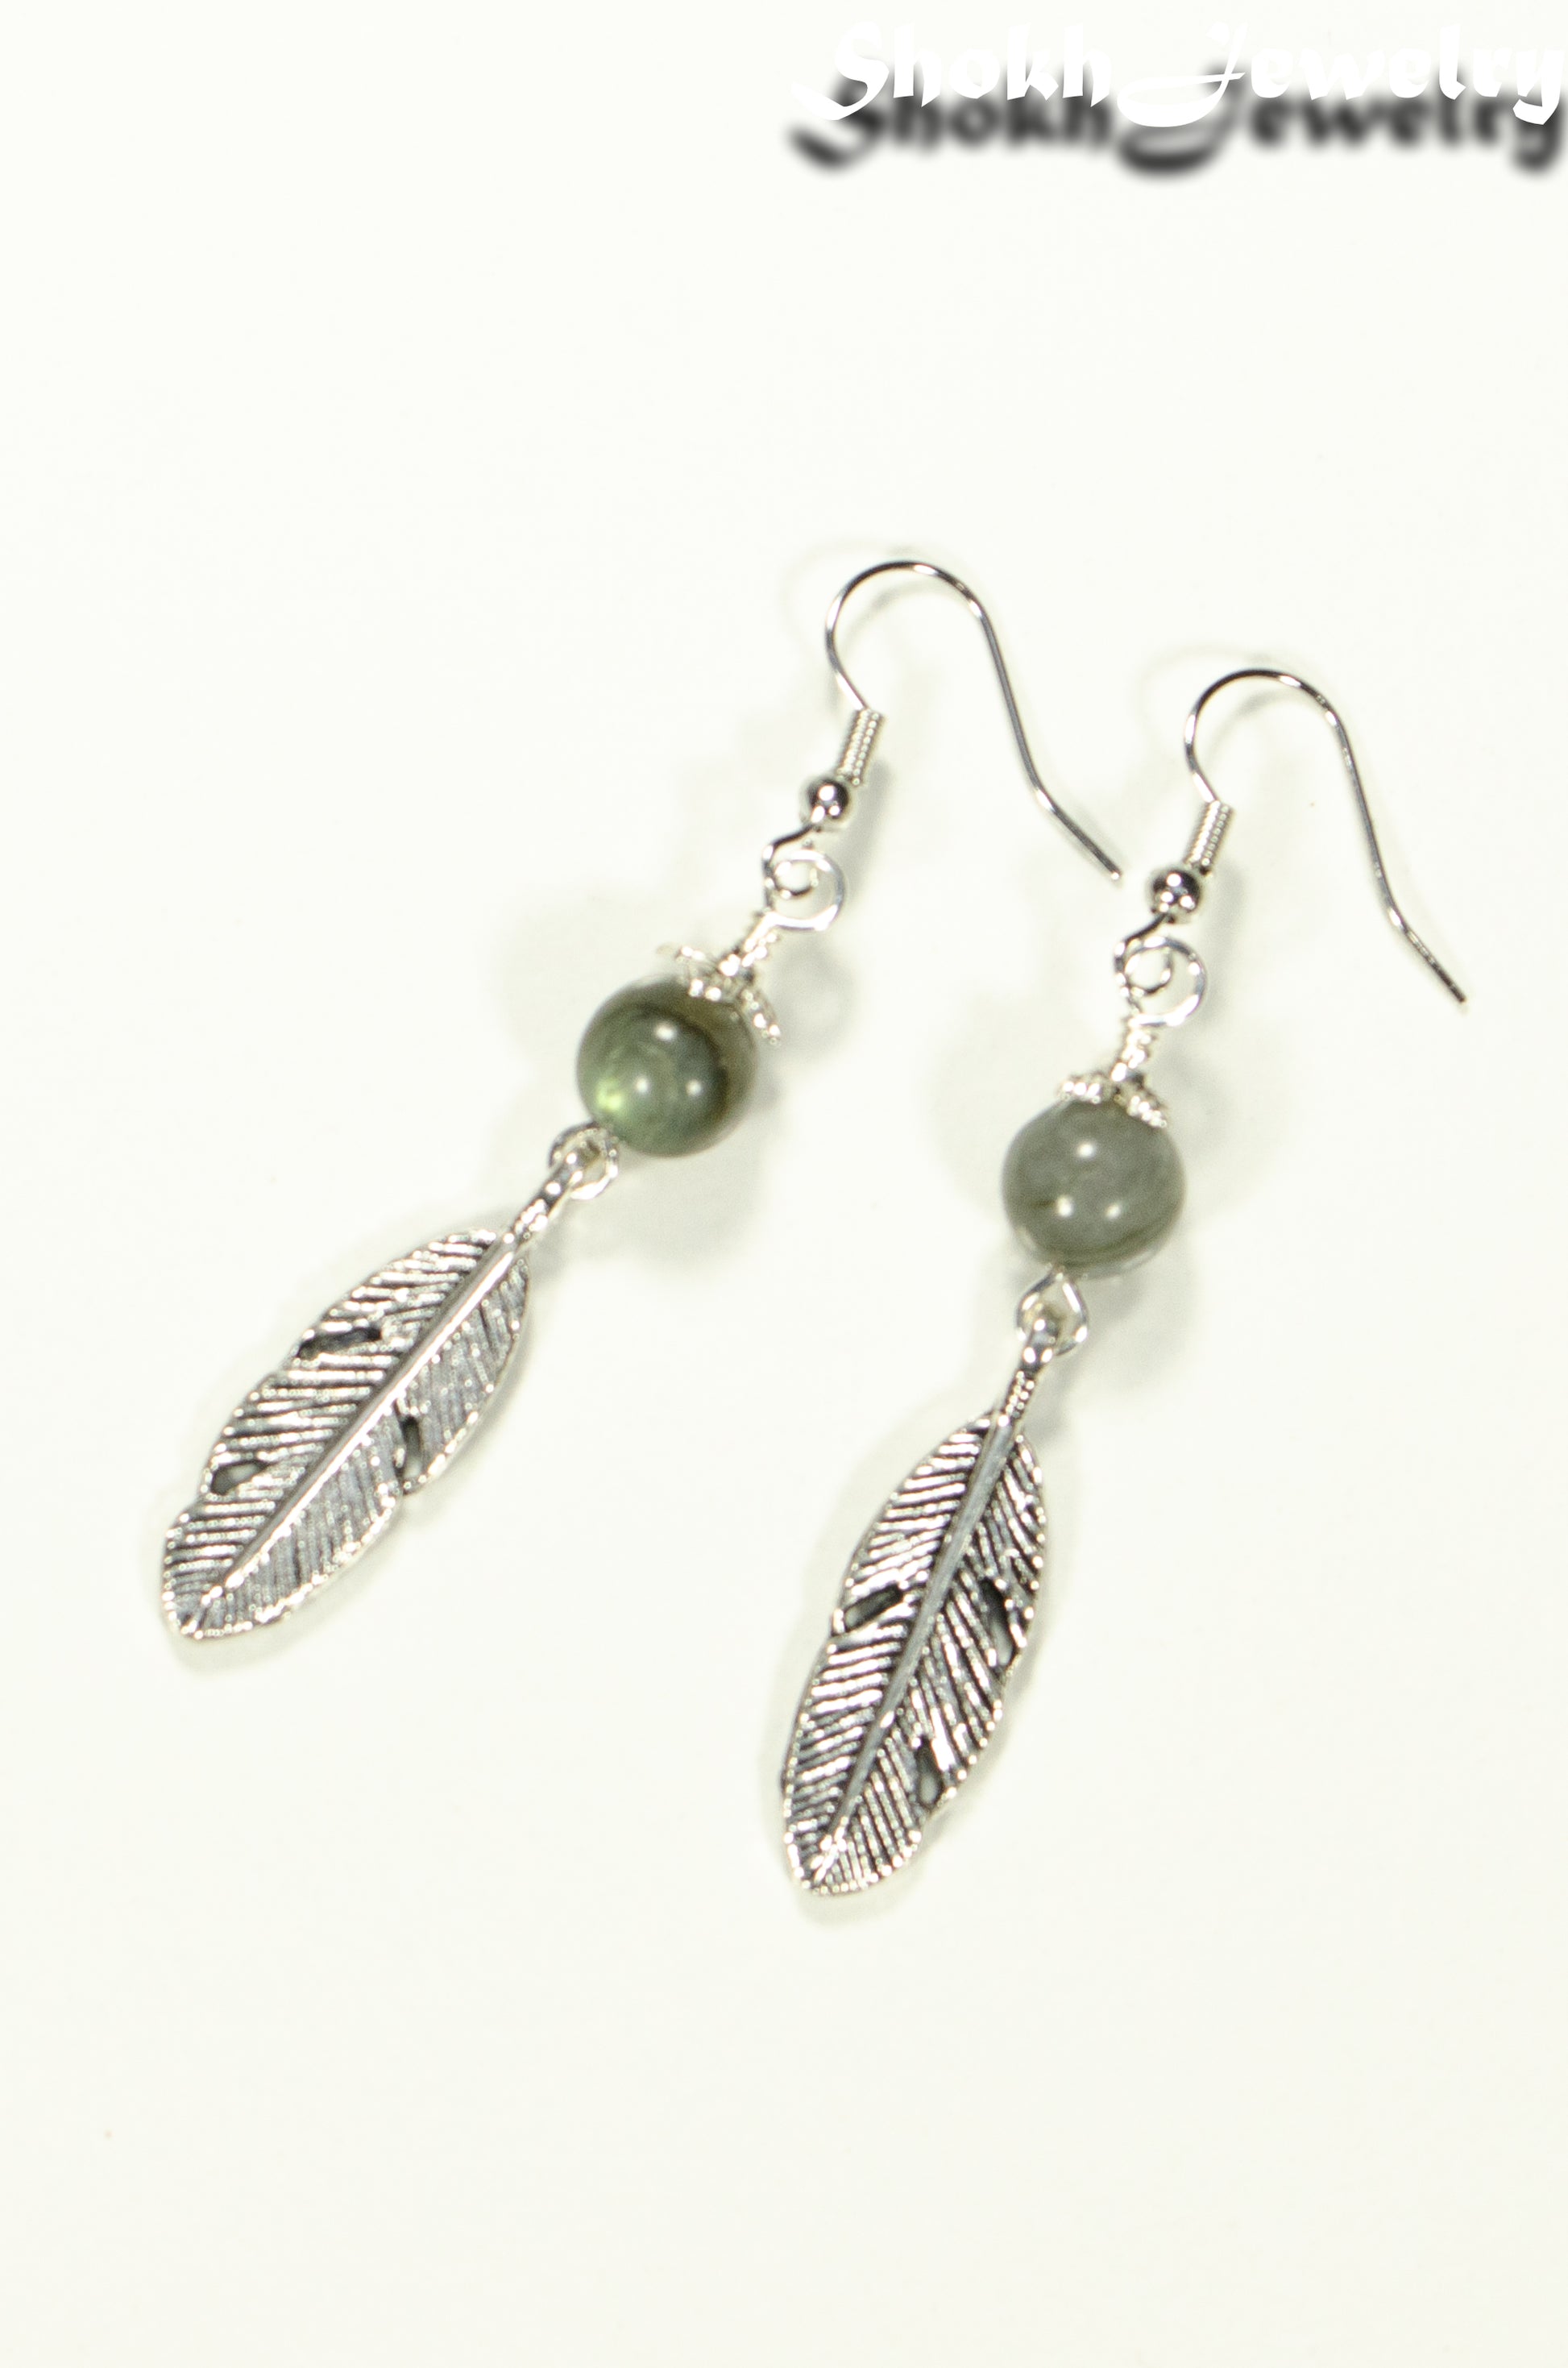 Top view of Labradorite Crystal and Tibetan Silver Feather Earrings.